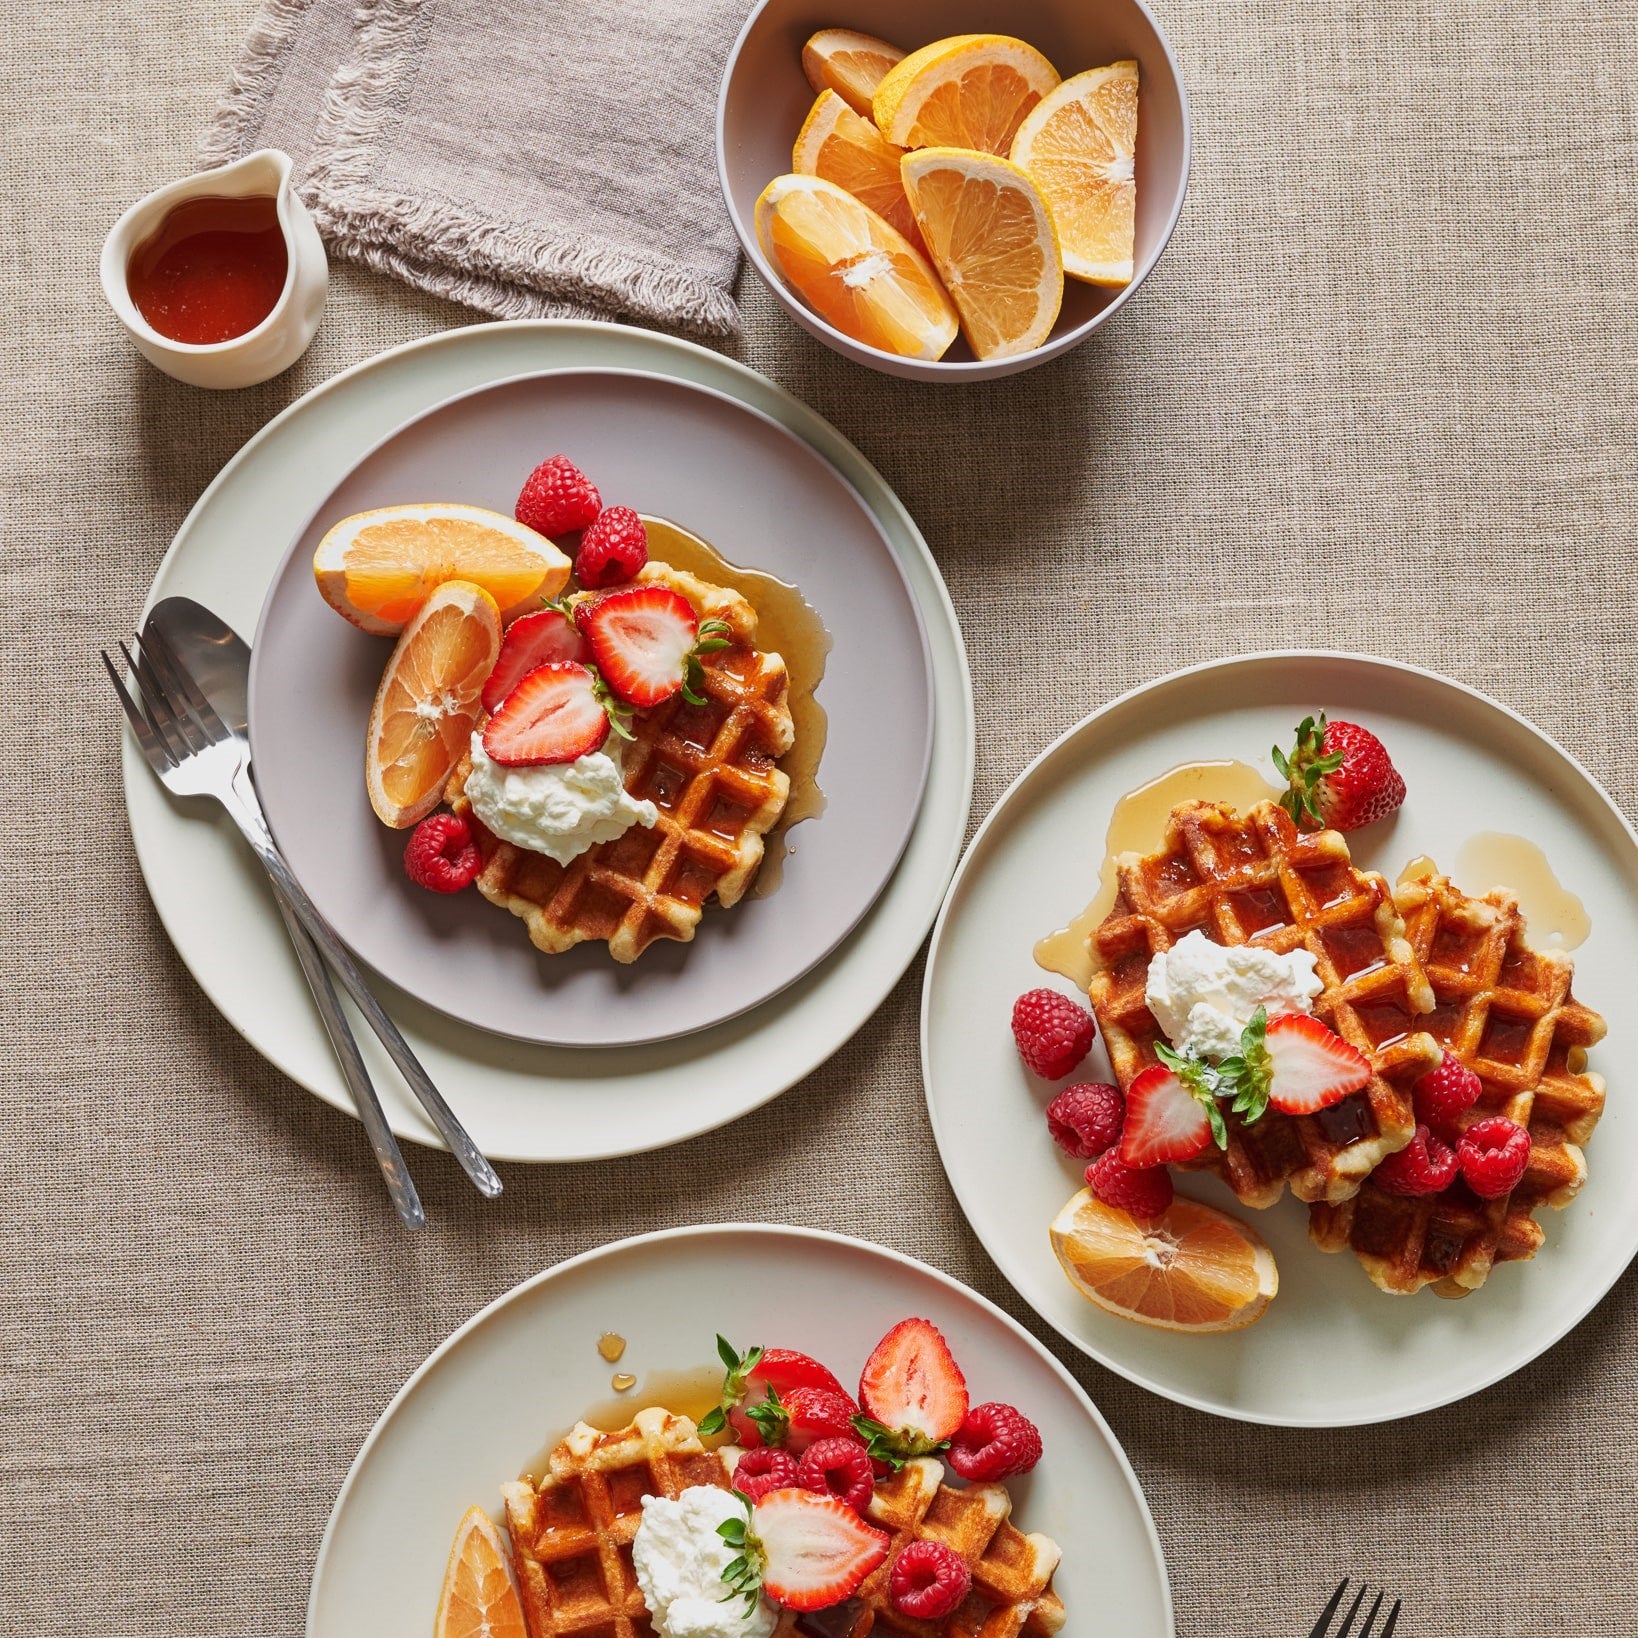 Waffles and oranges